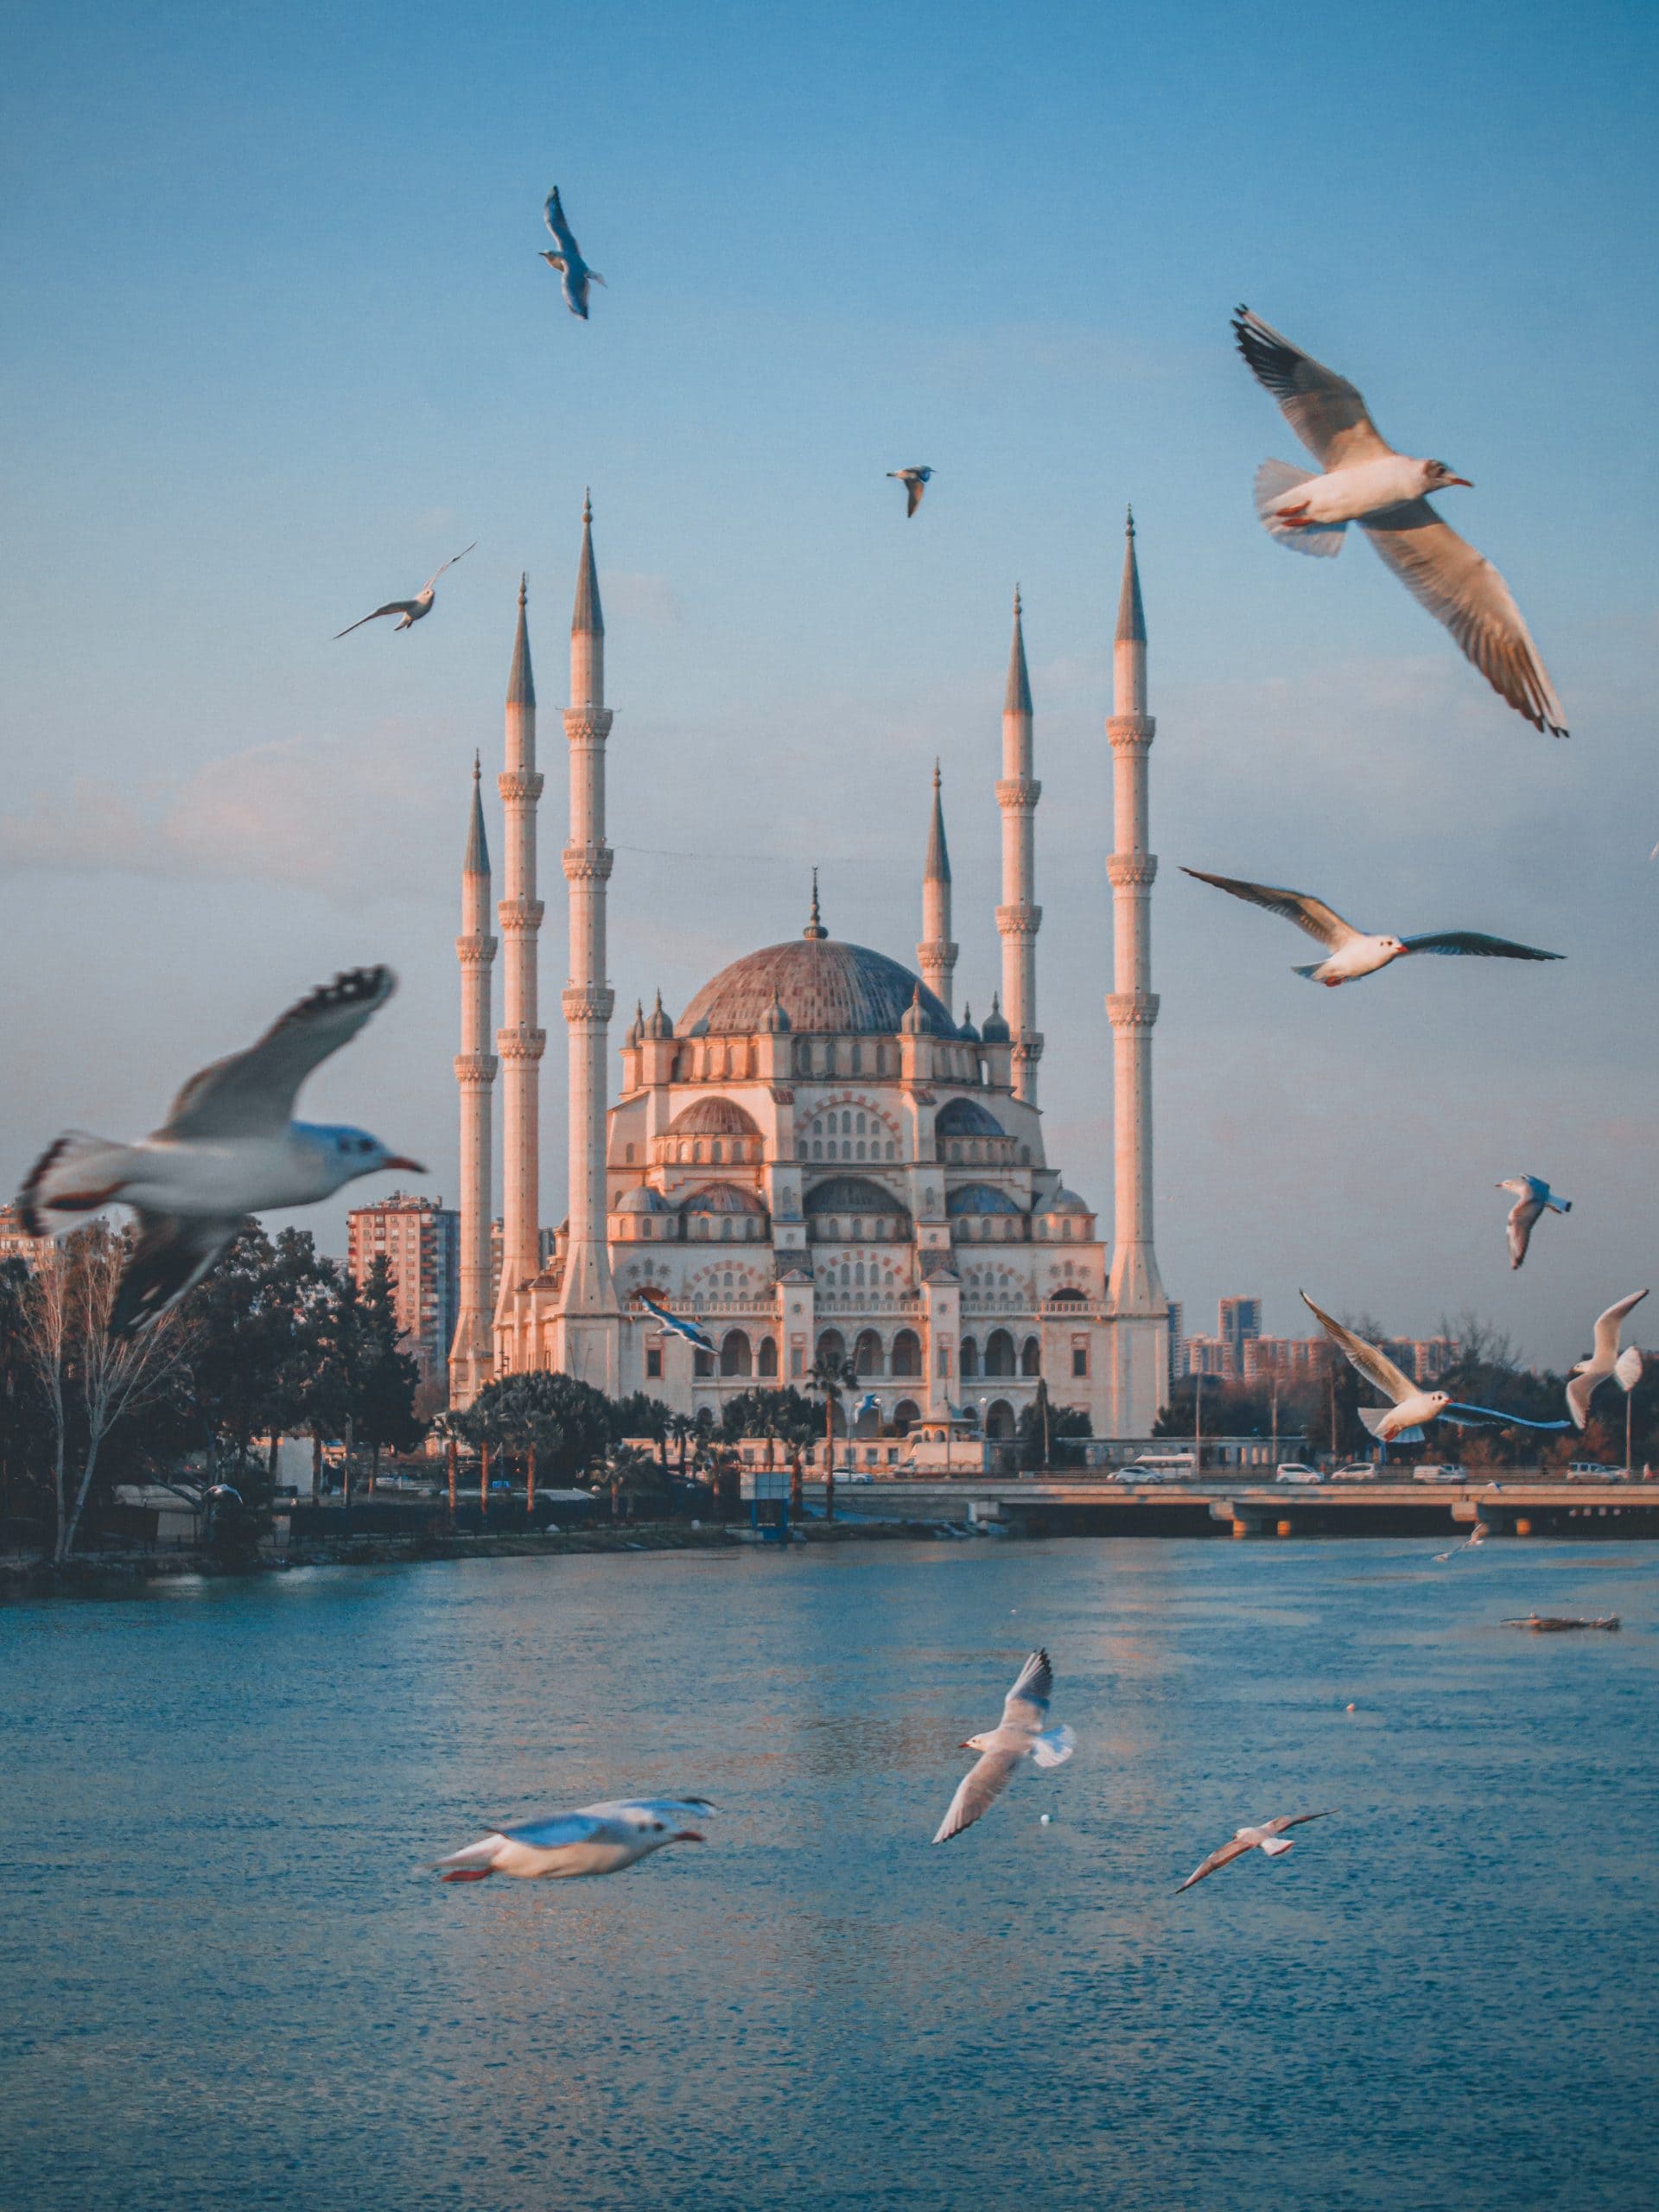 things to do in Turkey